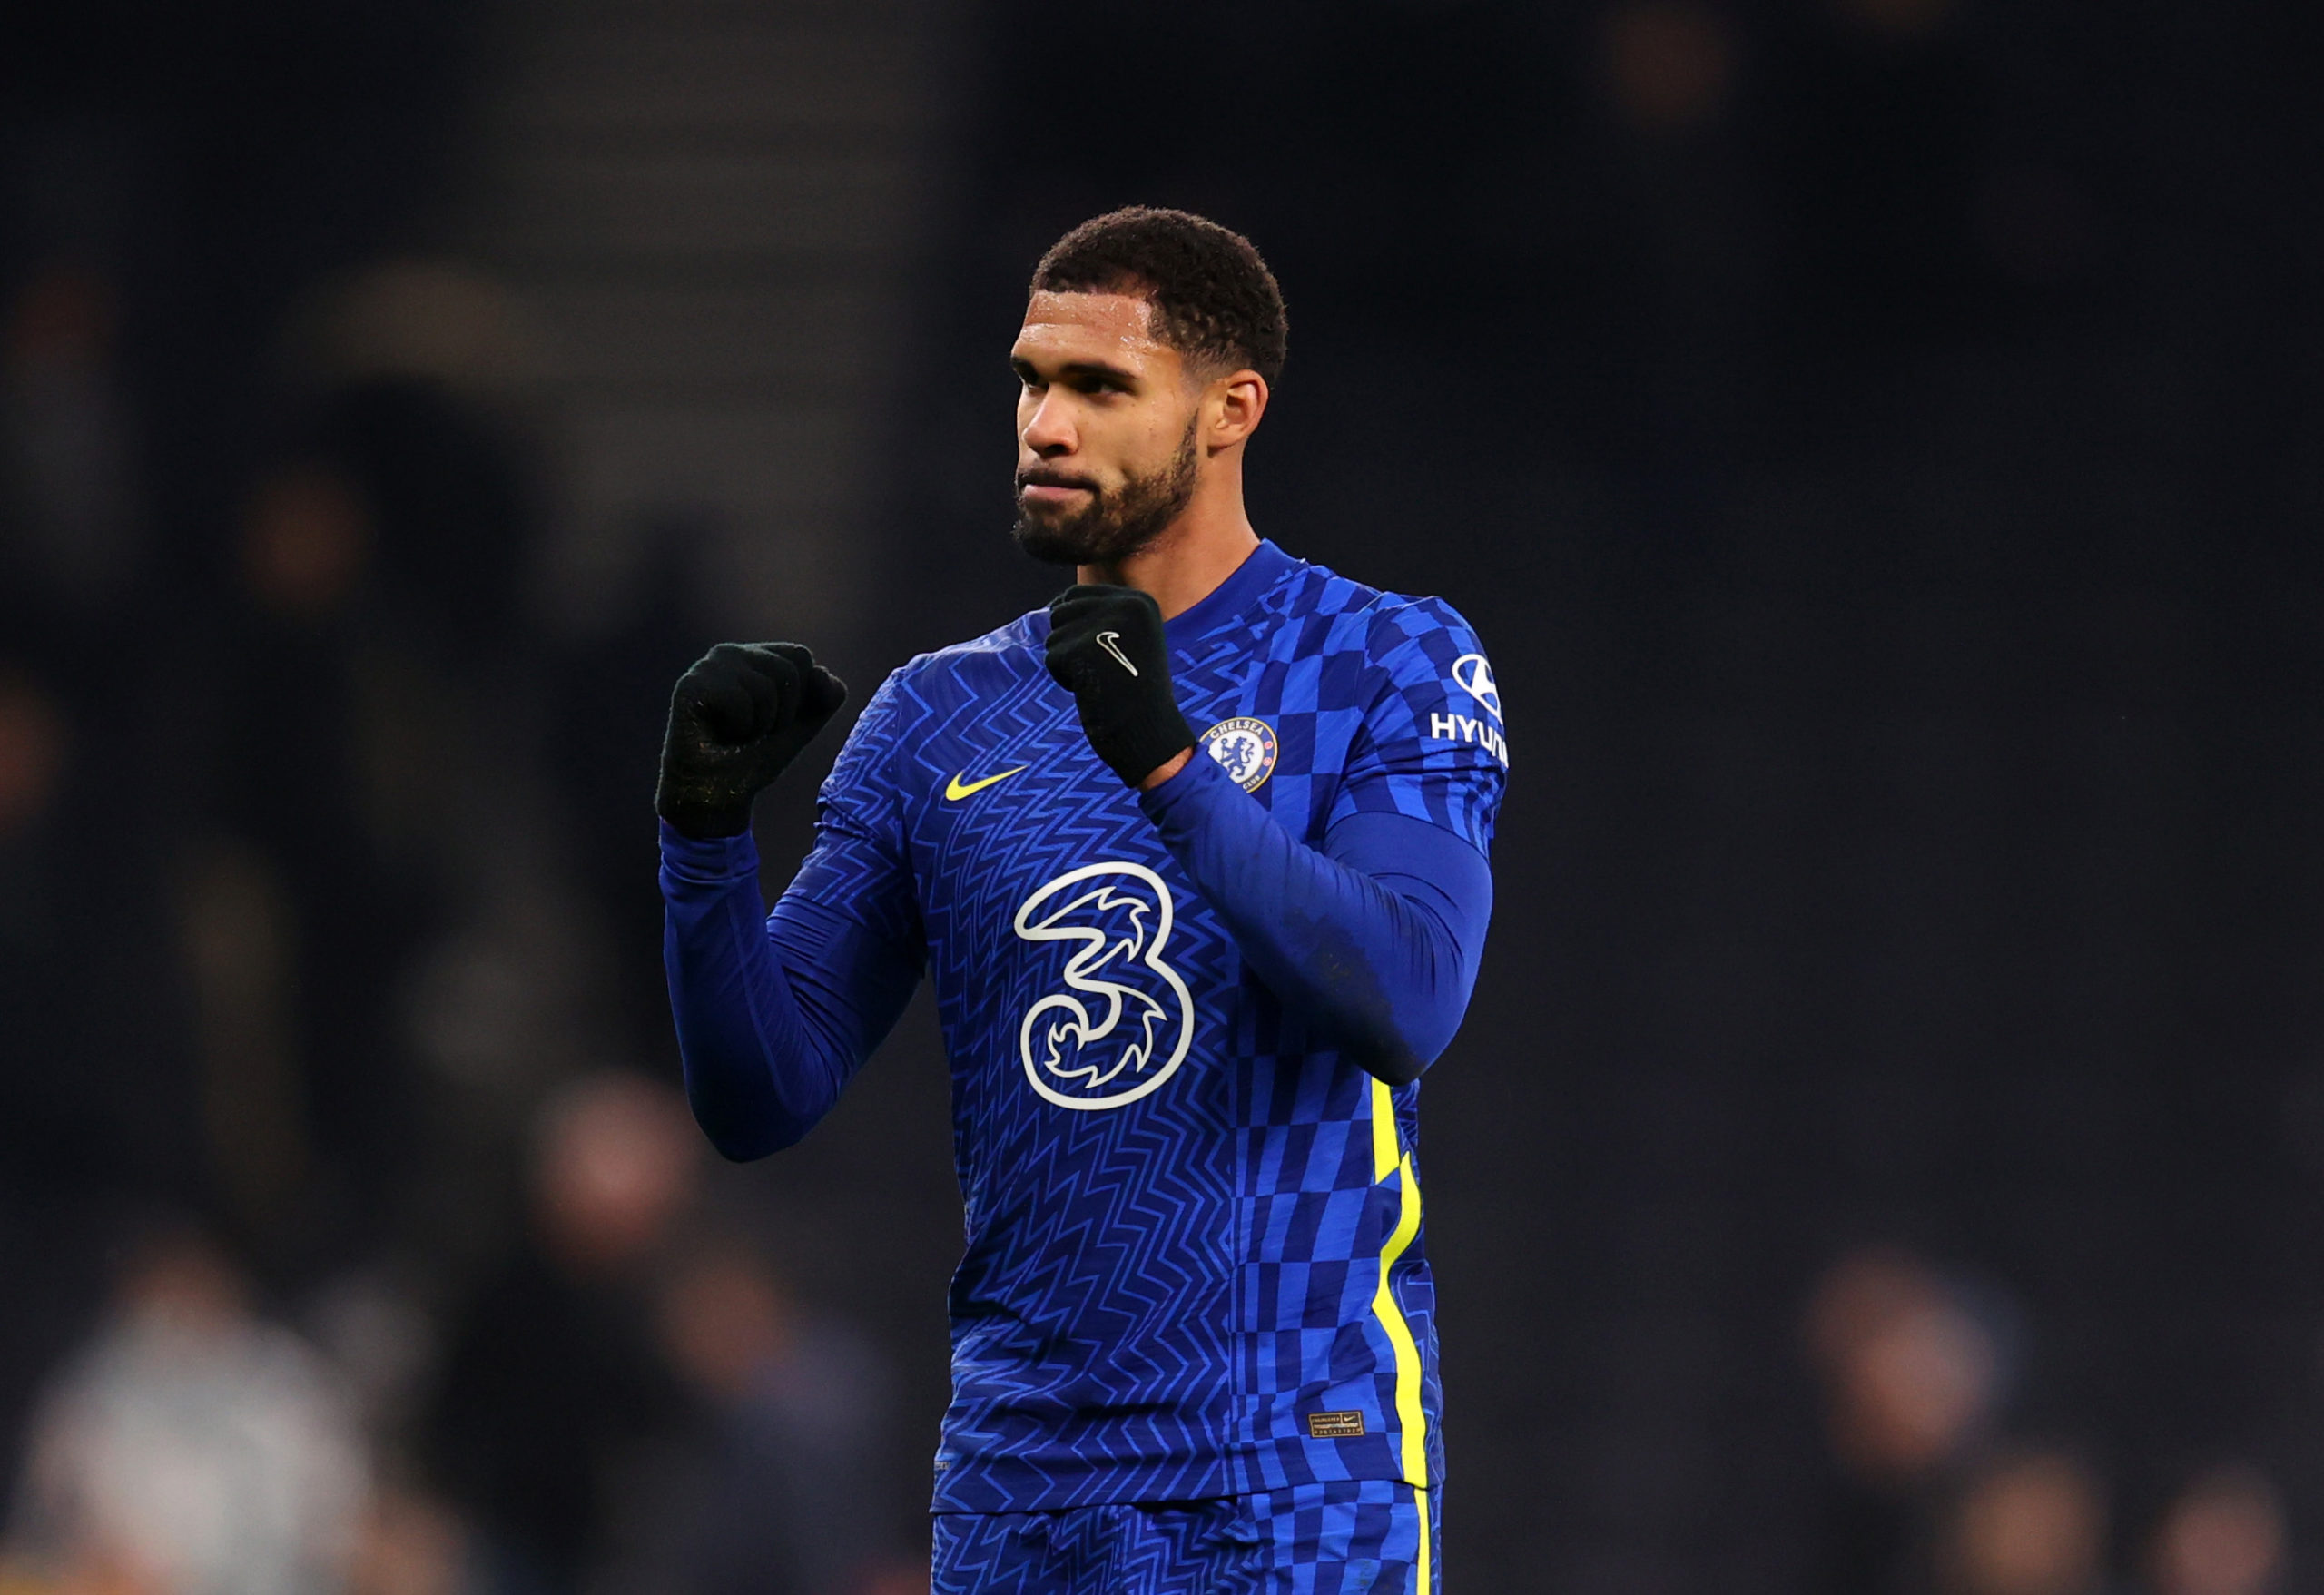 Report: The real reason Loftus-Cheek has been missing from Chelsea ...